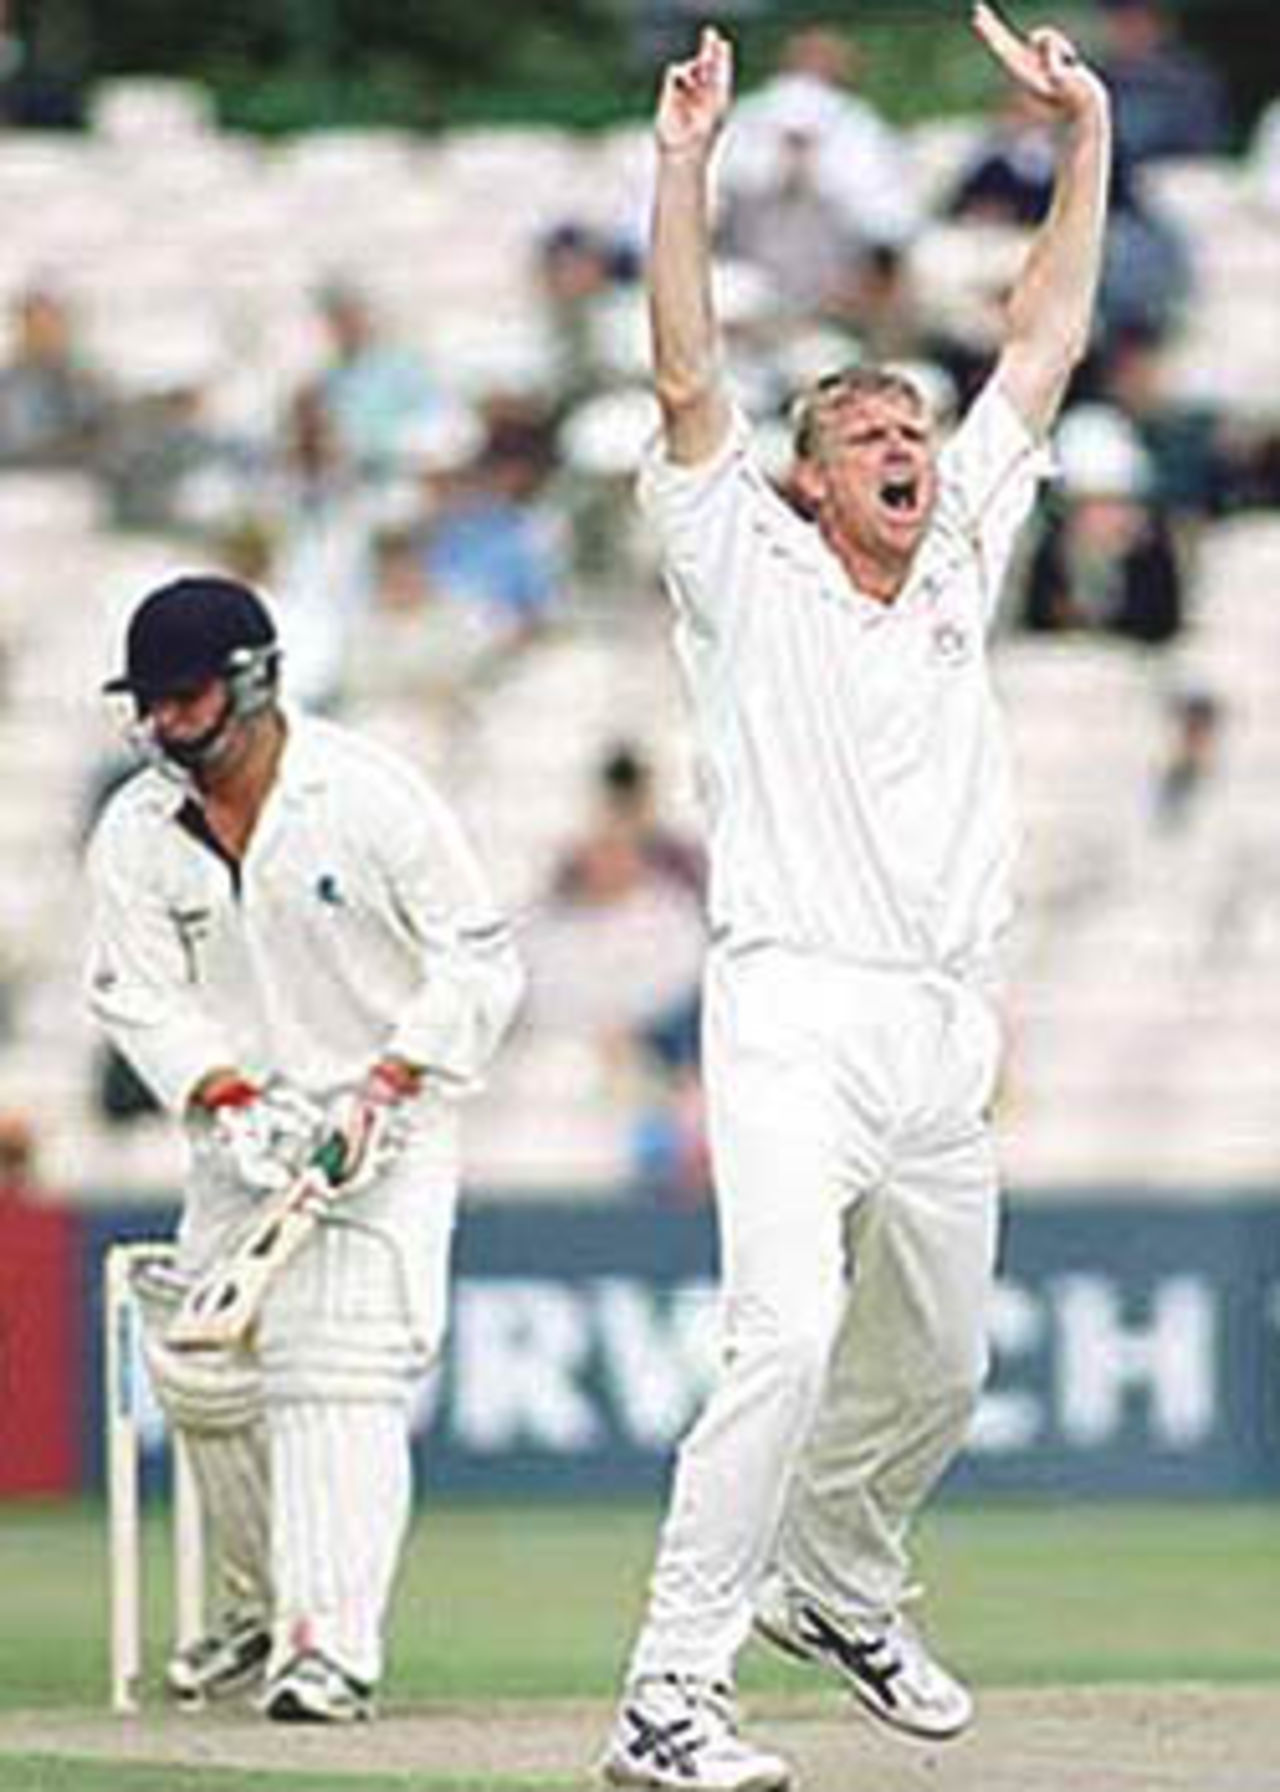 Peter Martin traps Richard Key LBW, PPP healthcare County Championship Division One, 2000, Lancashire v Kent, Old Trafford, Manchester, 17-20 August 2000(Day 1).